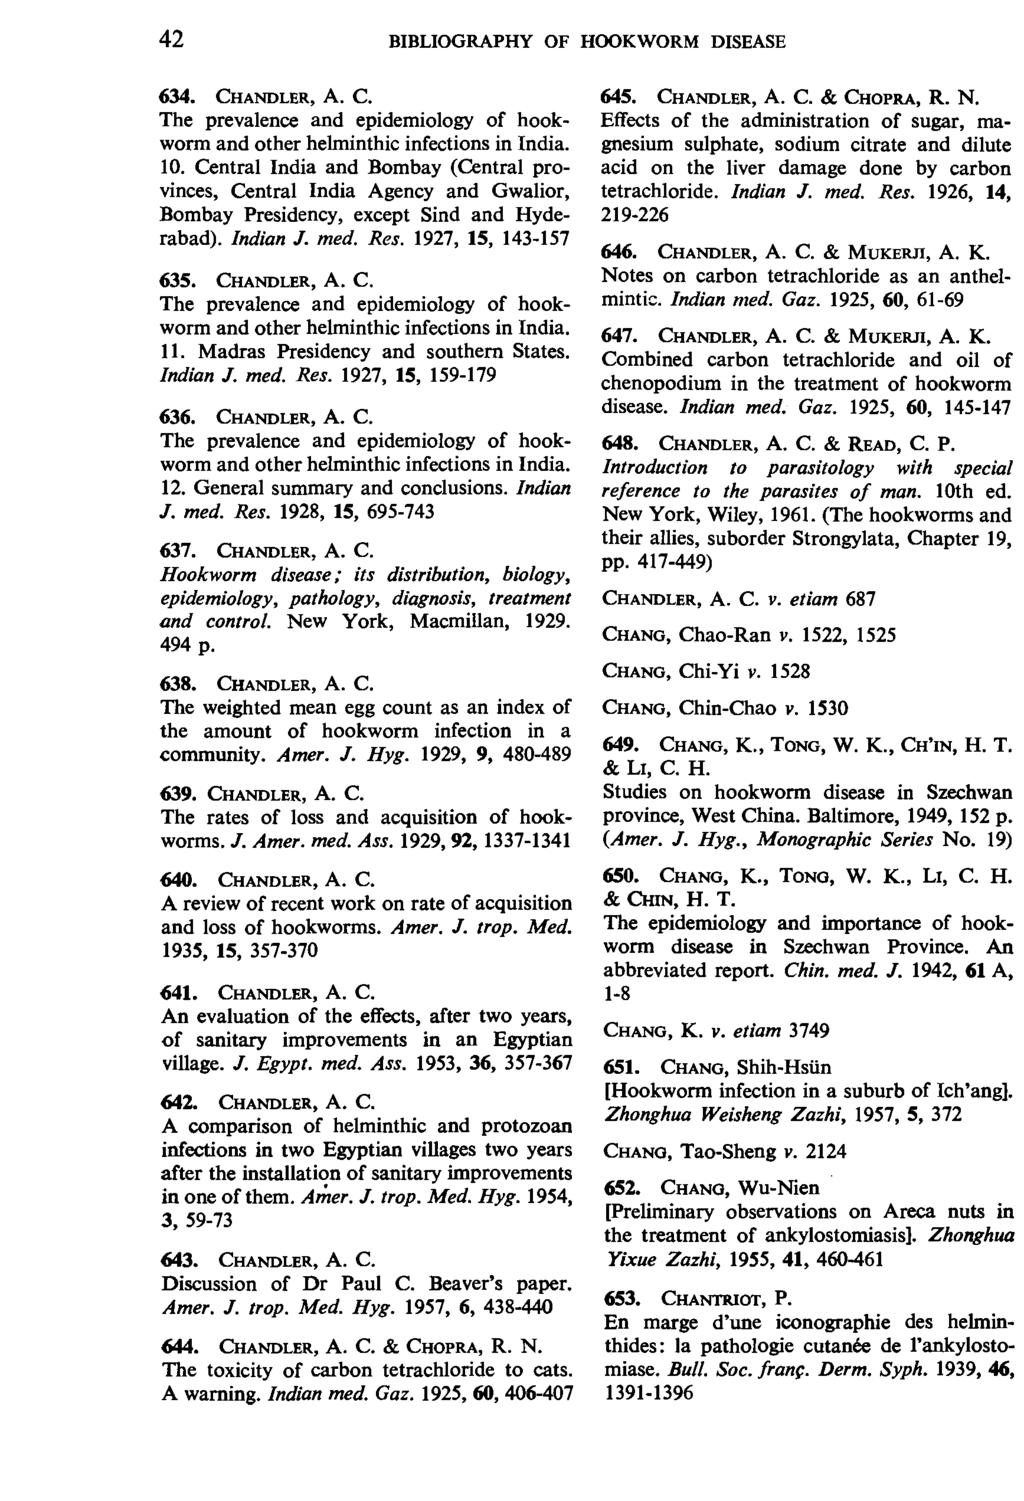 42 BIBLIOGRAPHY OF HOOKWORM DISEASE 634. CHANDLER, A. c. The prevalence and epidemiology of hookworm and other helminthic infections in India. 10.